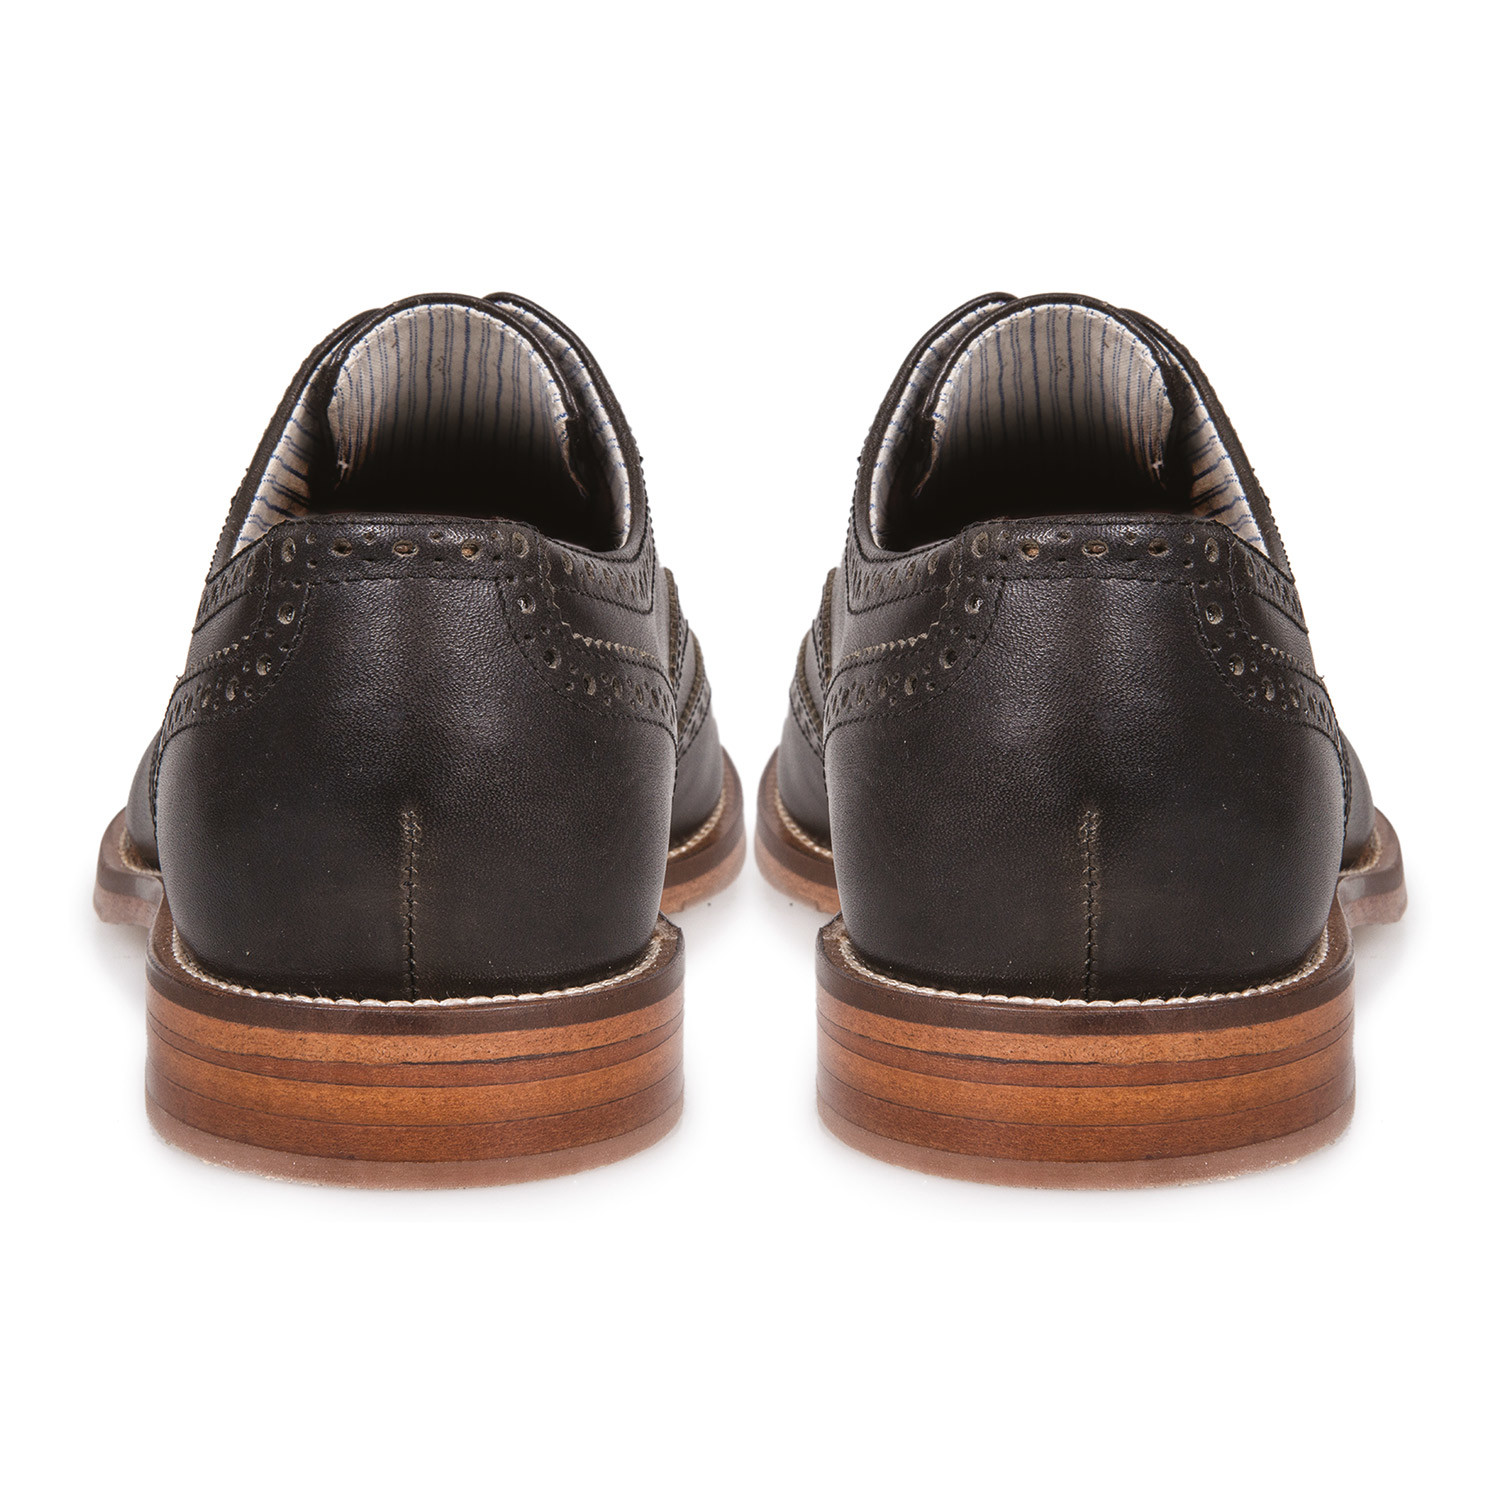 J SHOES // Charlie Wingtip Oxford // Black (US: 8) - J SHOES - Touch of ...